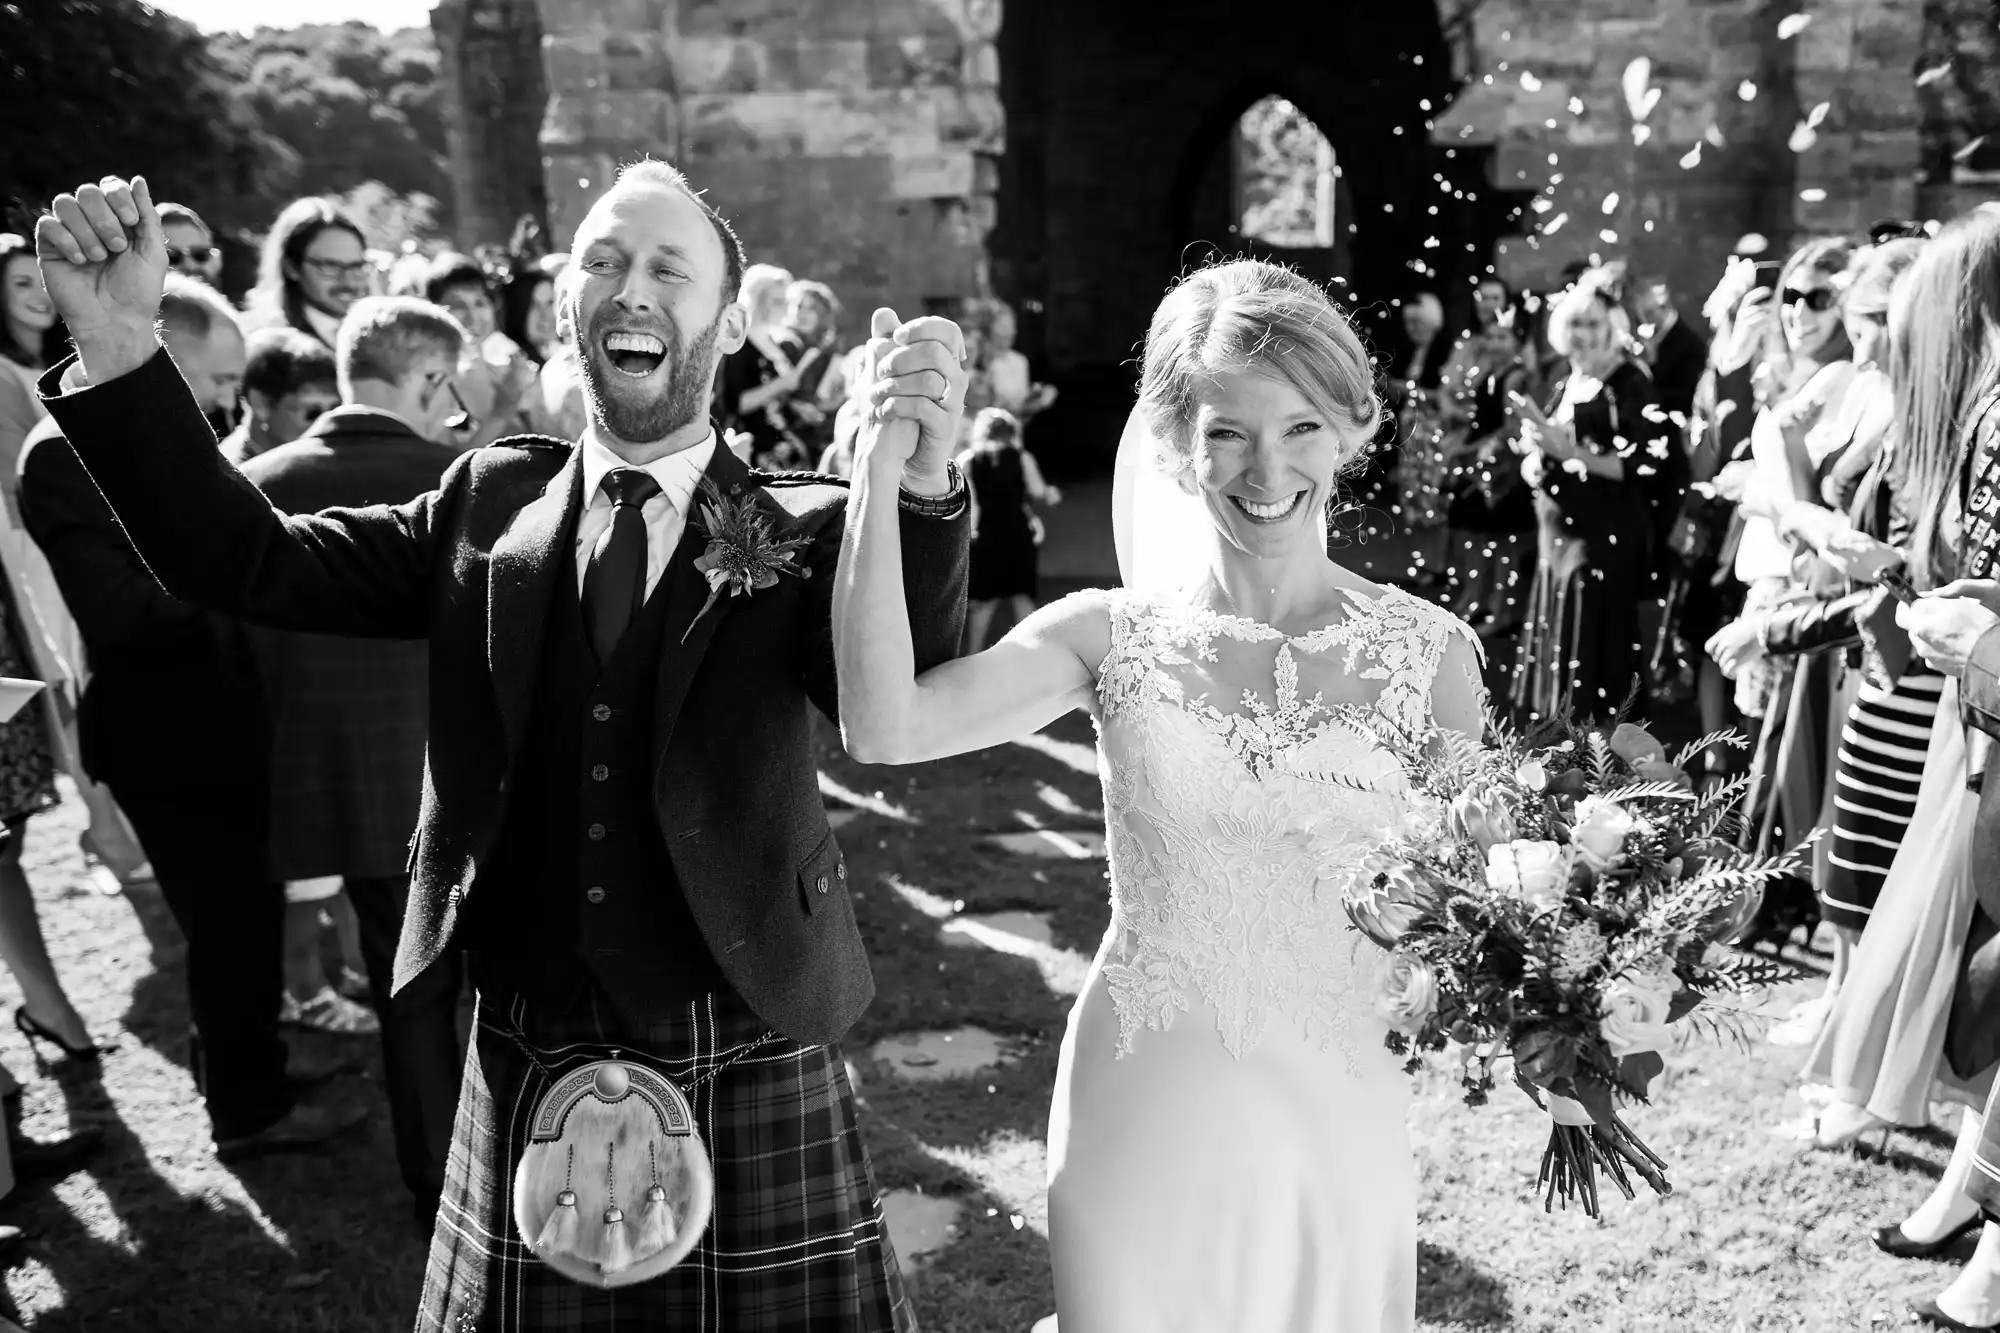 A bride and groom, smiling and holding hands, walk down an outdoor aisle while guests cheer and throw confetti. The groom is wearing a kilt, and the bride is holding a bouquet.